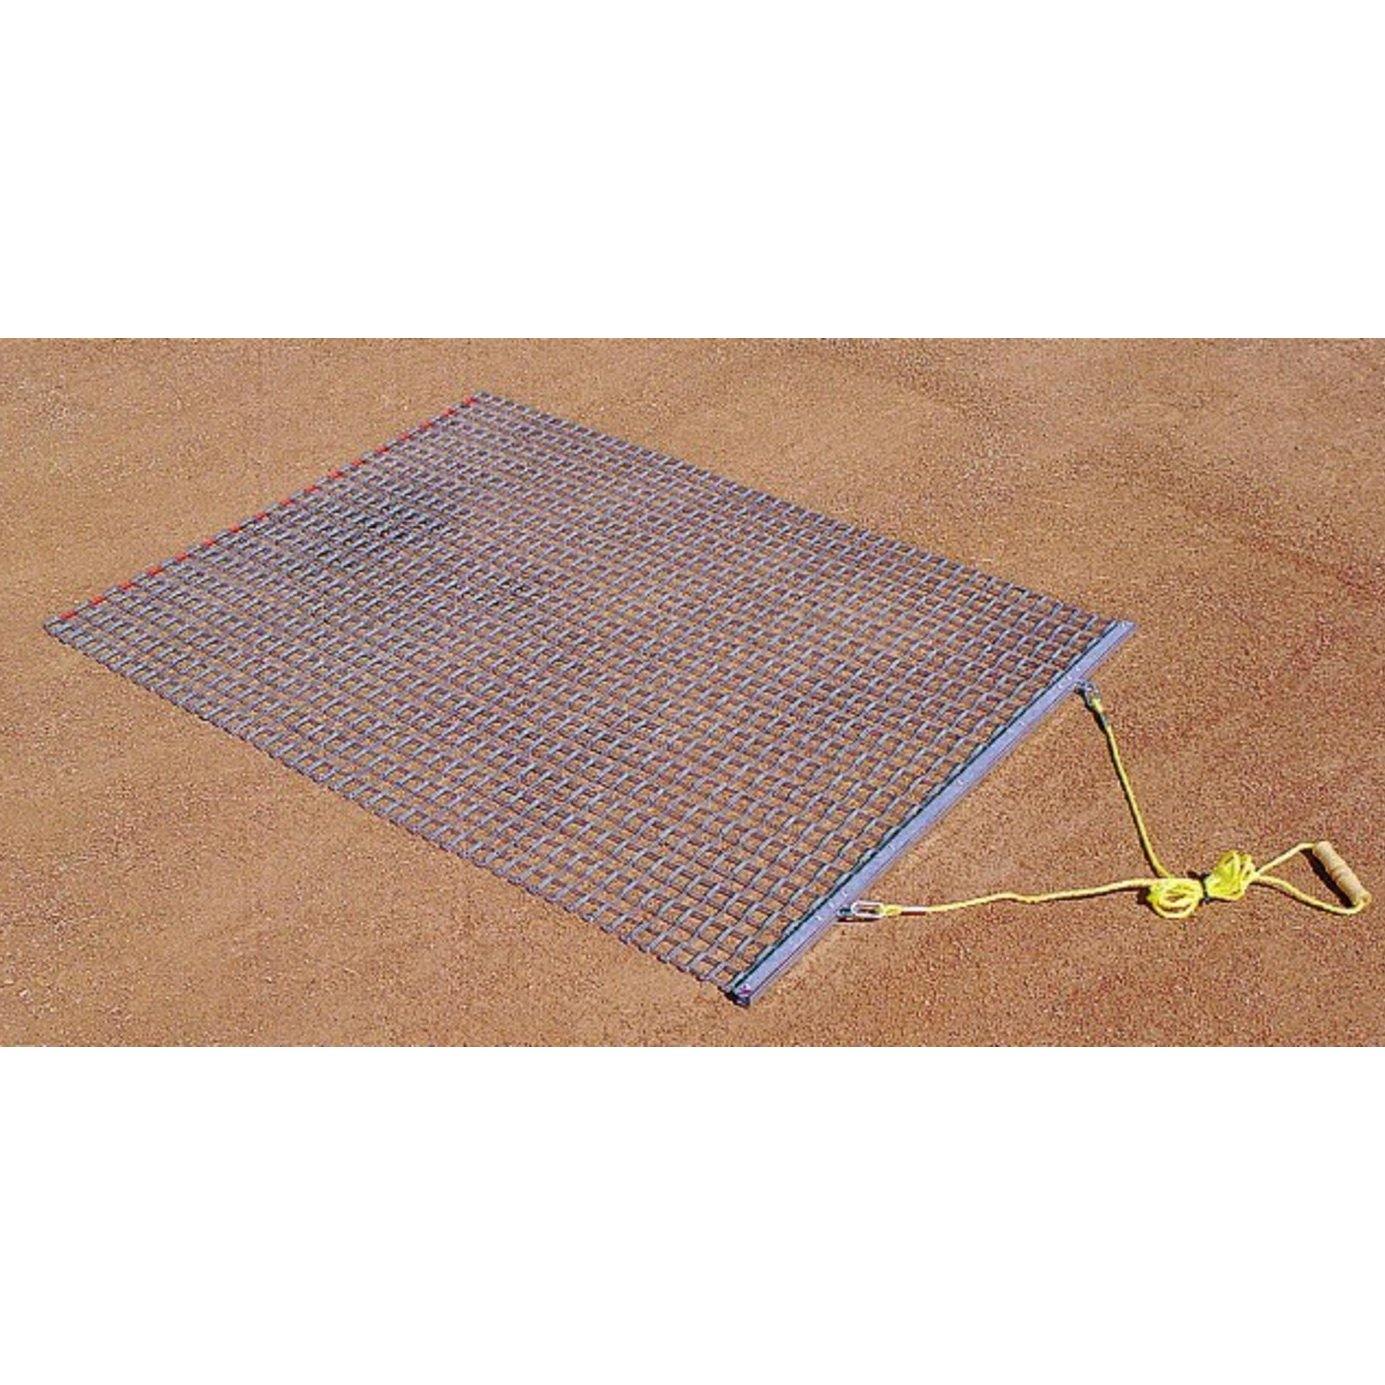 Steel Drag Mat for Baseball Fields - Pitch Pro Direct